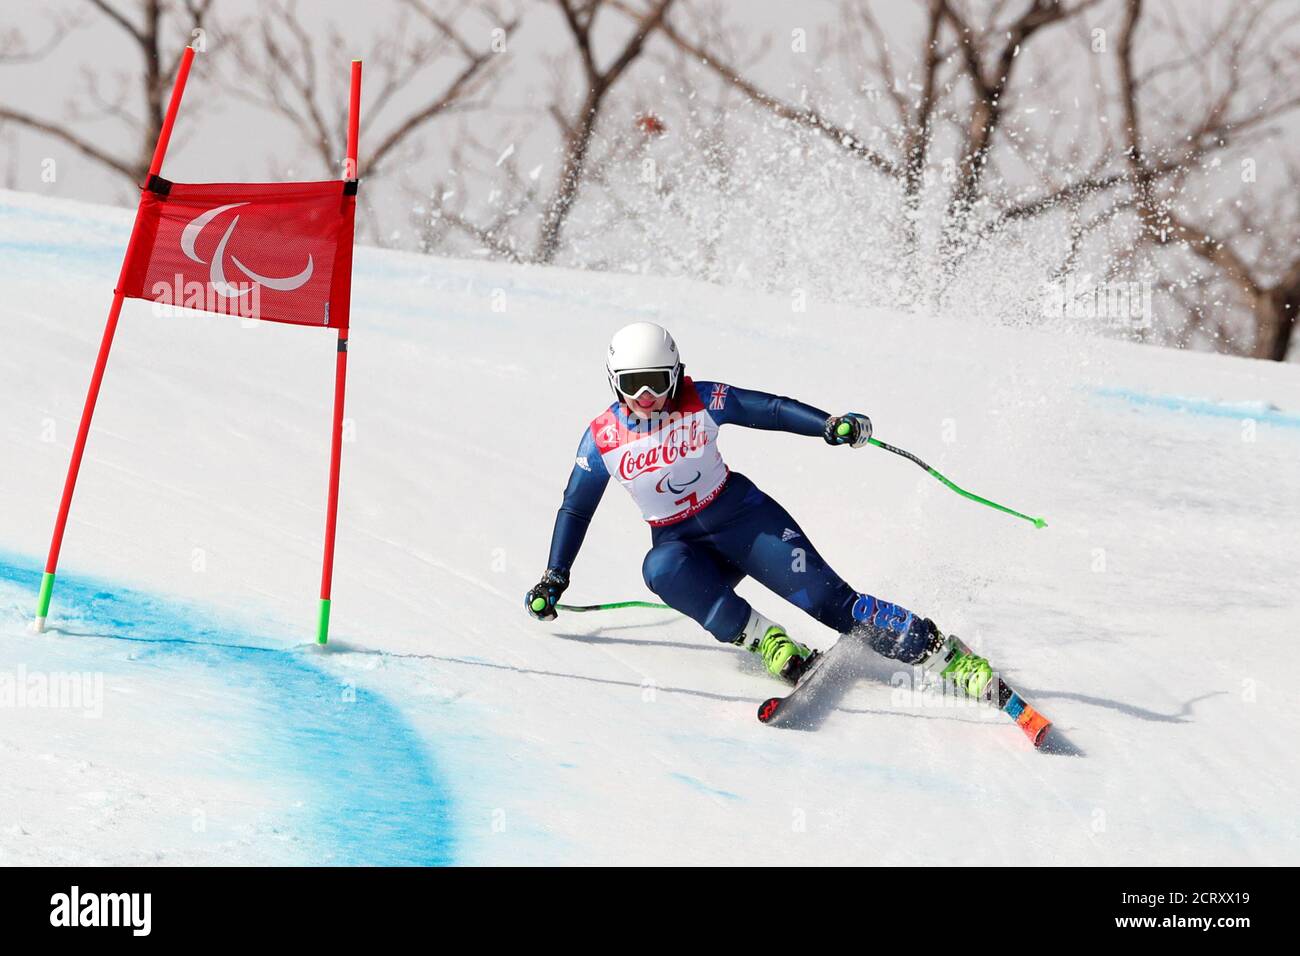 Alpine Skiing - Pyeongchang 2018 Winter Paralympics - Women's Super Combined Super-G - Visually Impaired - Jeongseon Alpine Centre - Jeongseon, South Korea - March 13, 2018 - Kelly Gallagher of Britain. REUTERS/Paul Hanna Stock Photo